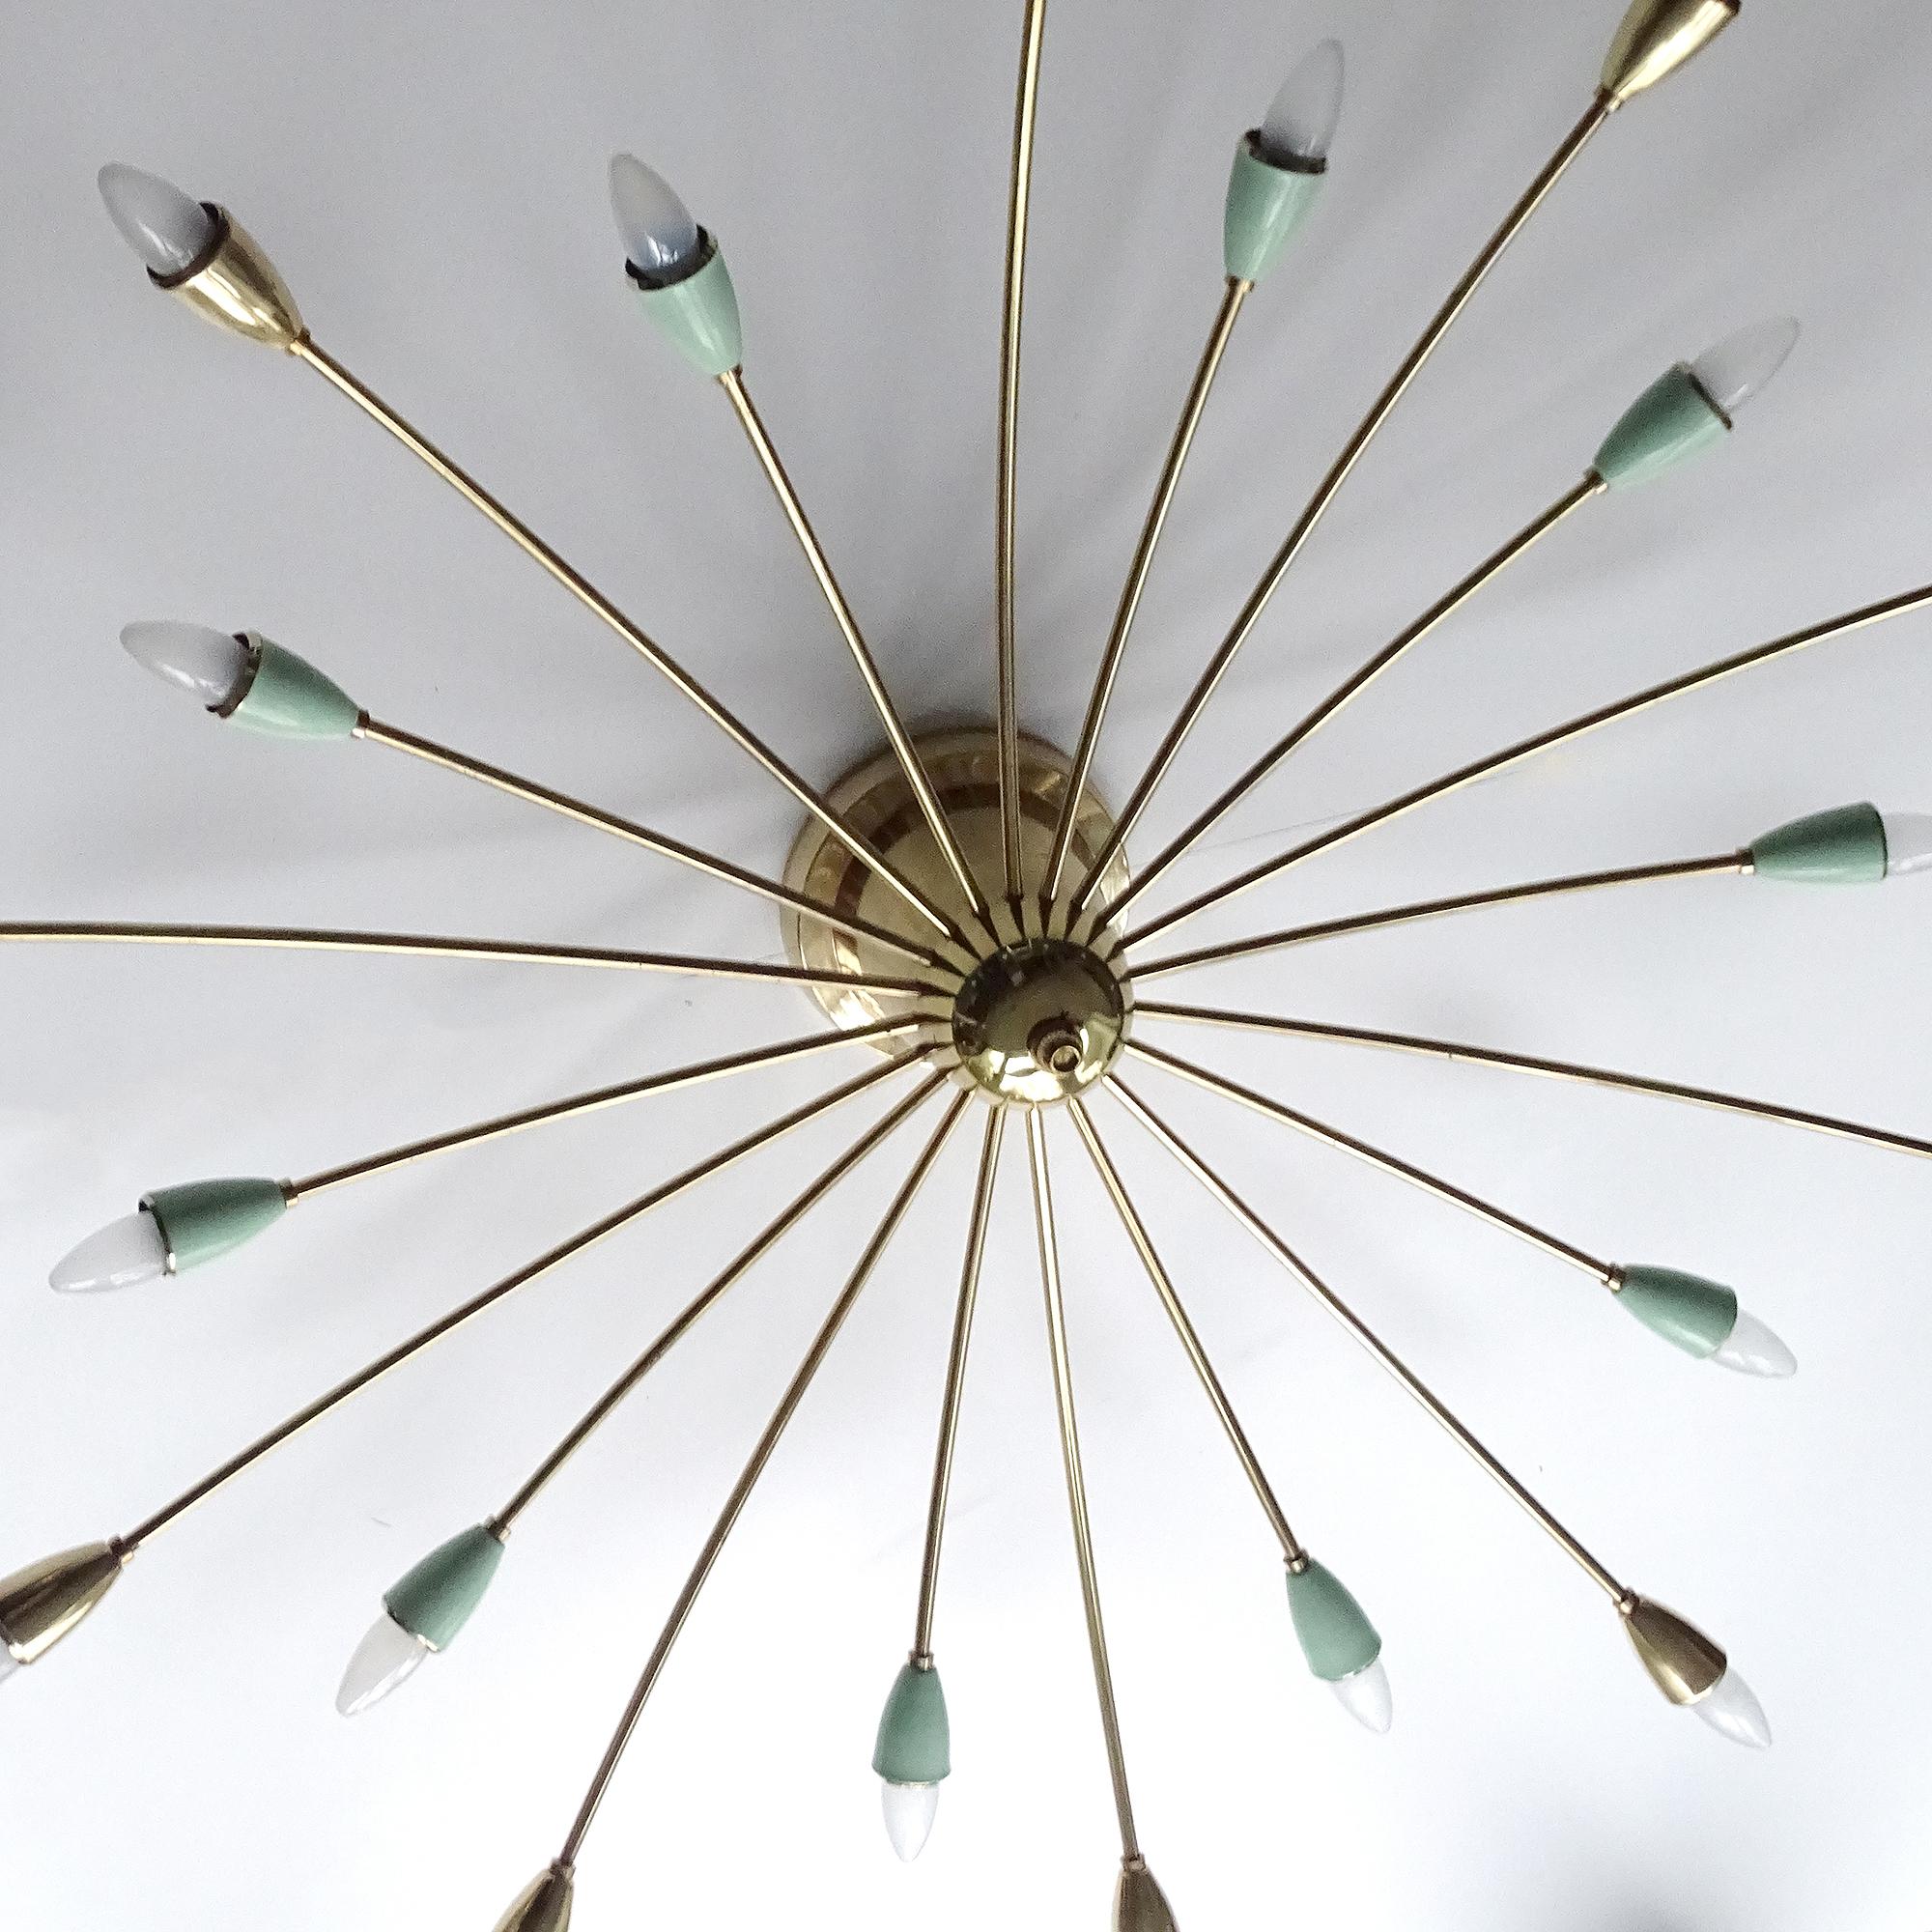 Very large Italian Sputnik light, featuring a 2-tiers array of 20 spokes, 10 short, 10 long, brass structures with alternating jade green enameled and brass fittings caps mounted on very large center cone piece for direct ceiling mount - NOT A